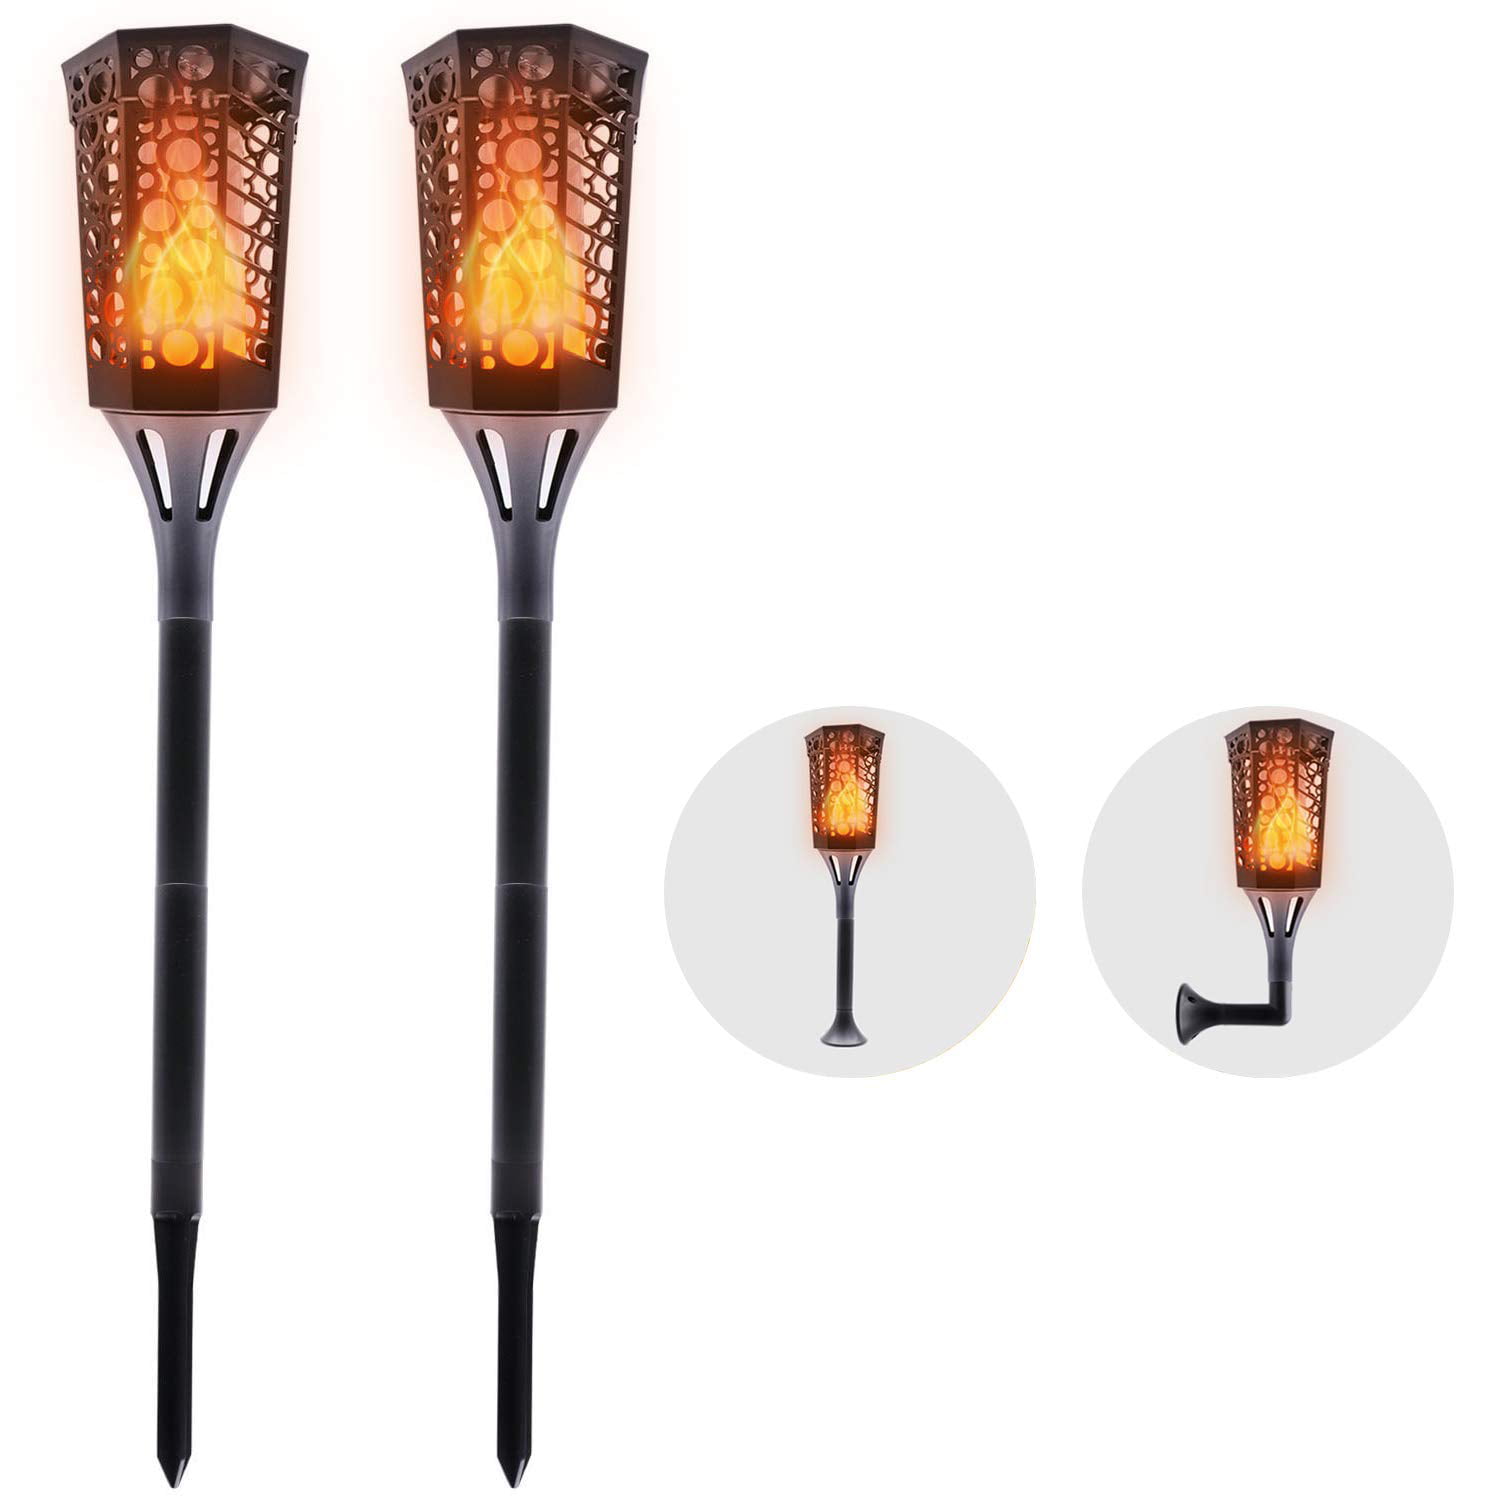 Flickering 96 LED Solar Flame Torch Light Outdoor Garden Yard Lawn Pathway Lamp 